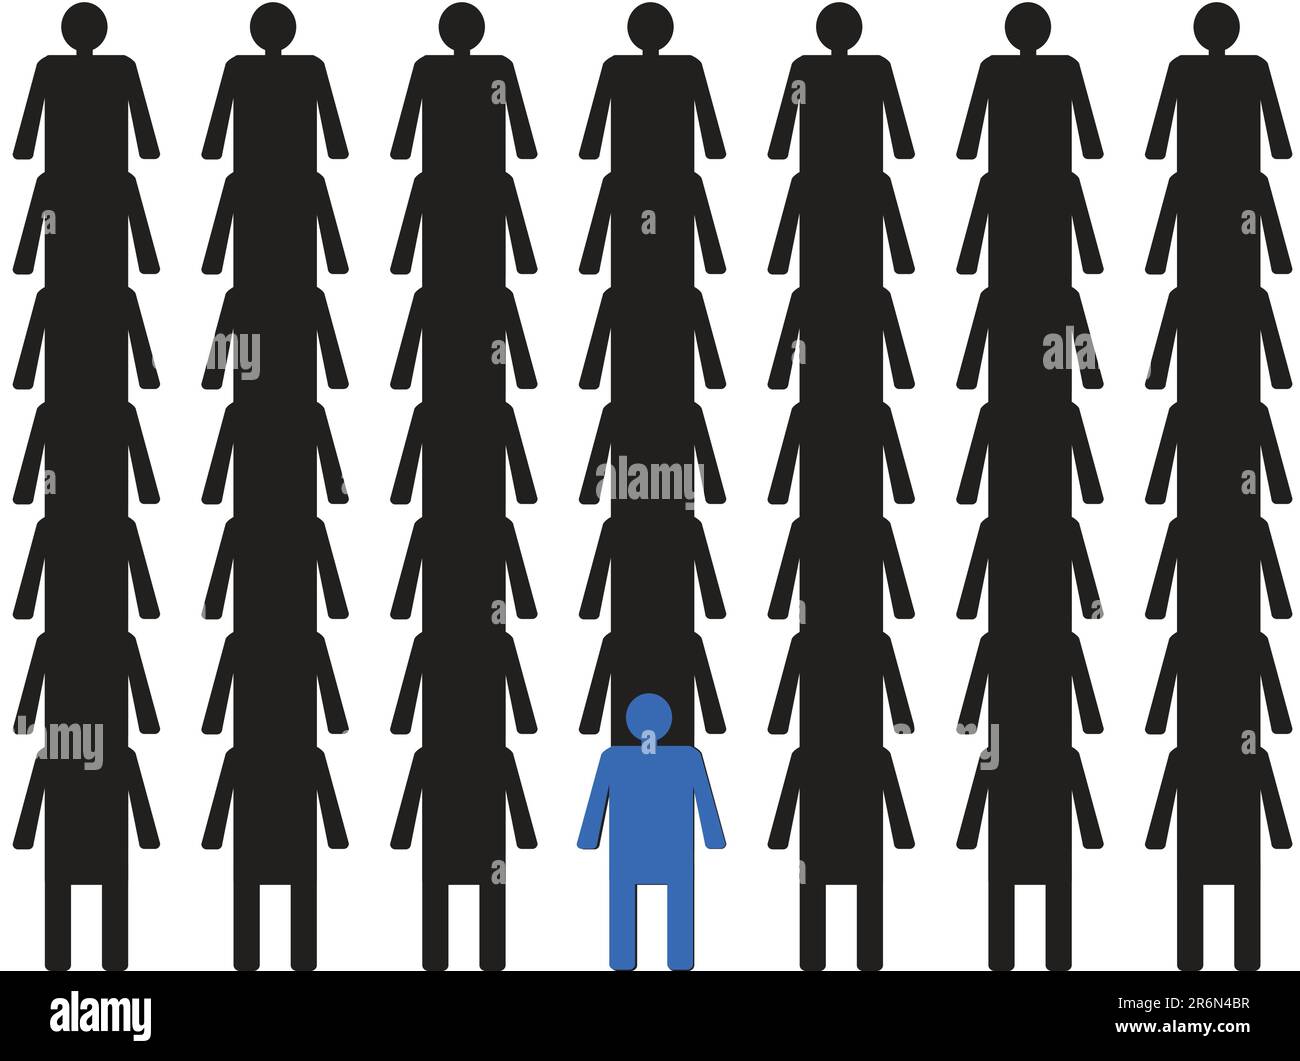 Illustration of employee unique and different. Stock Vector